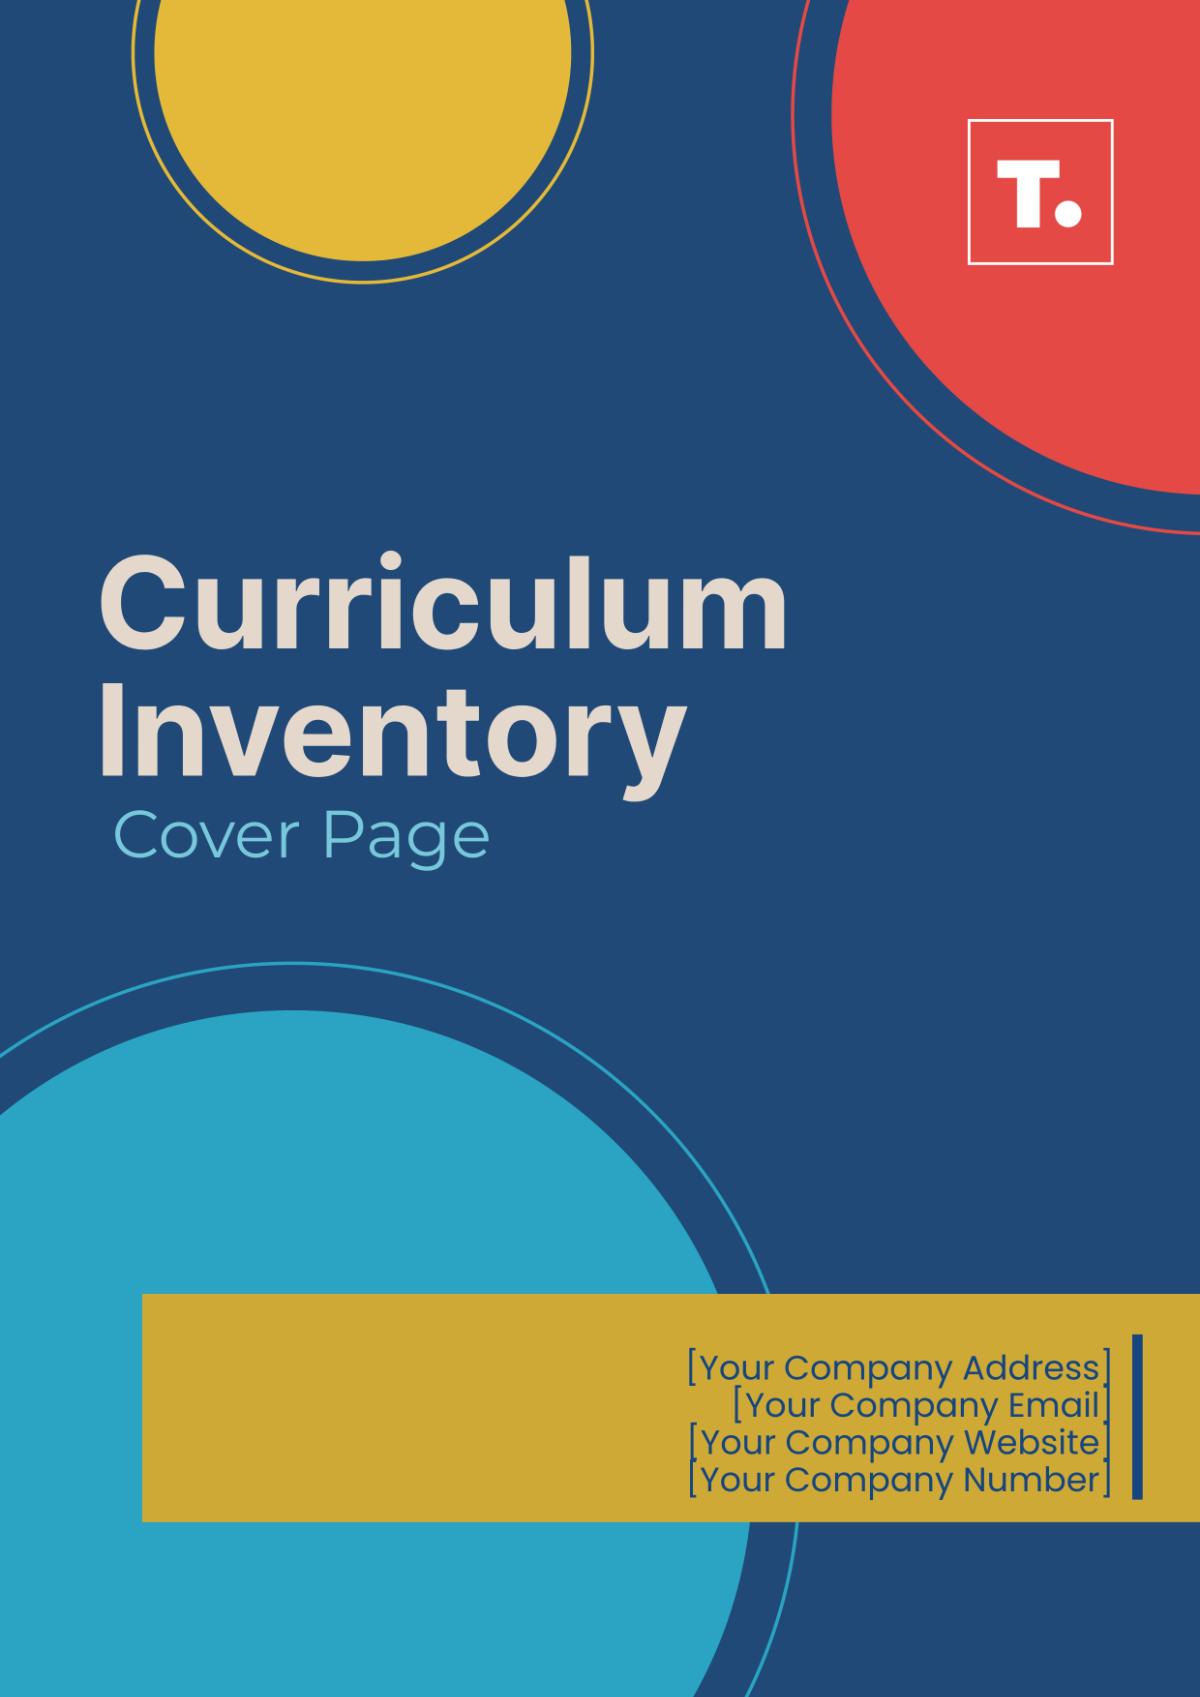 Curriculum Inventory Cover Page